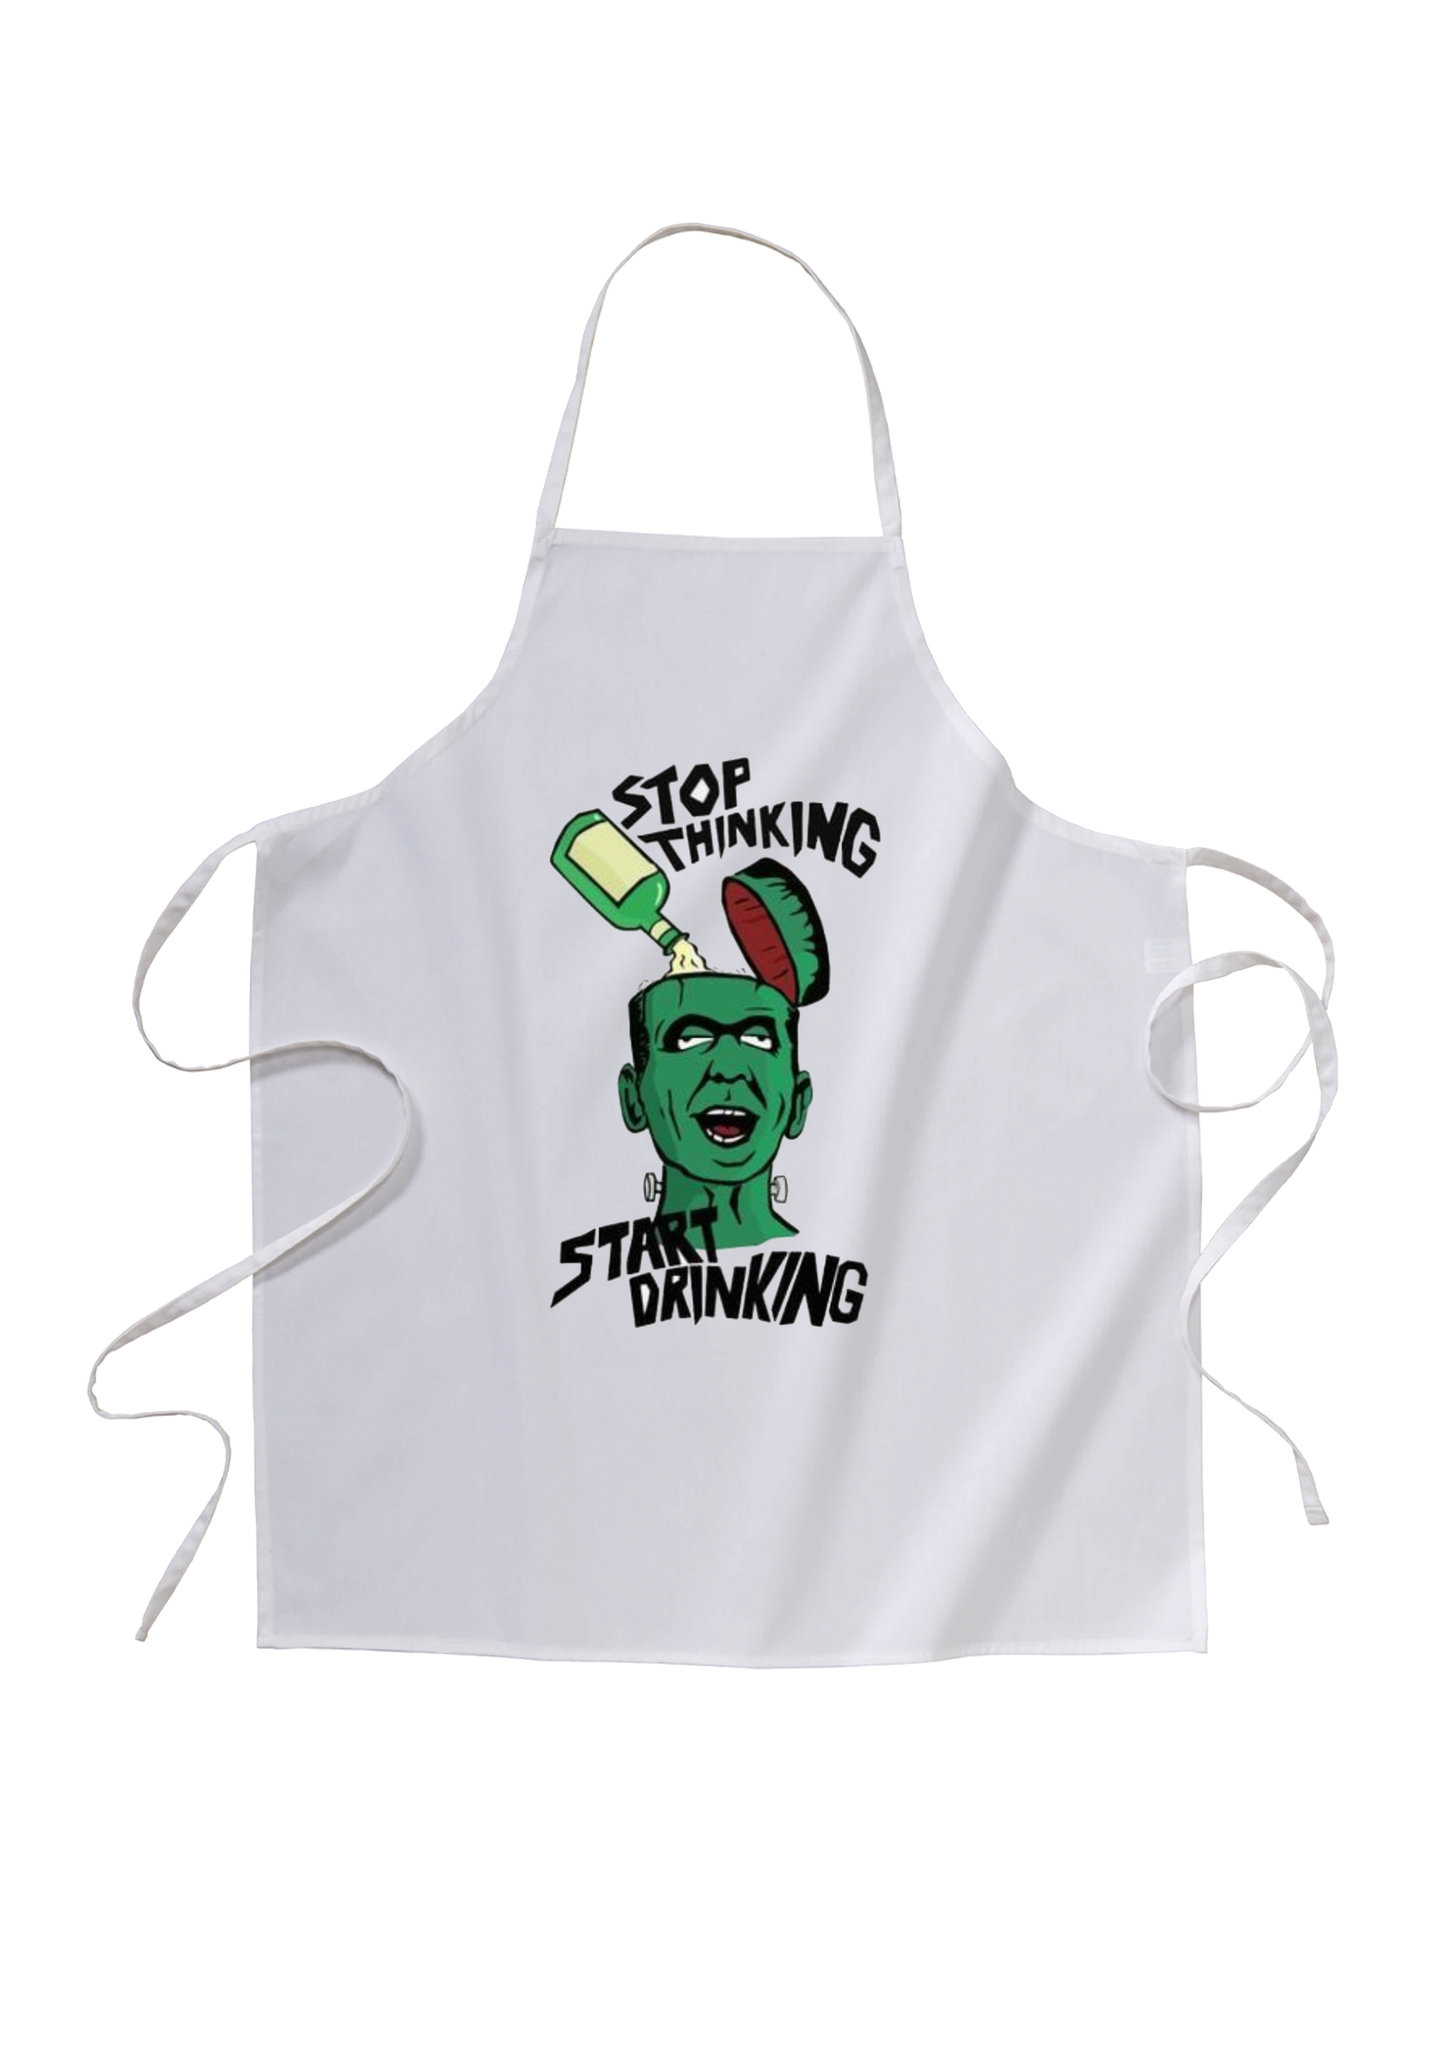 apron - stop thinking let's start drinking